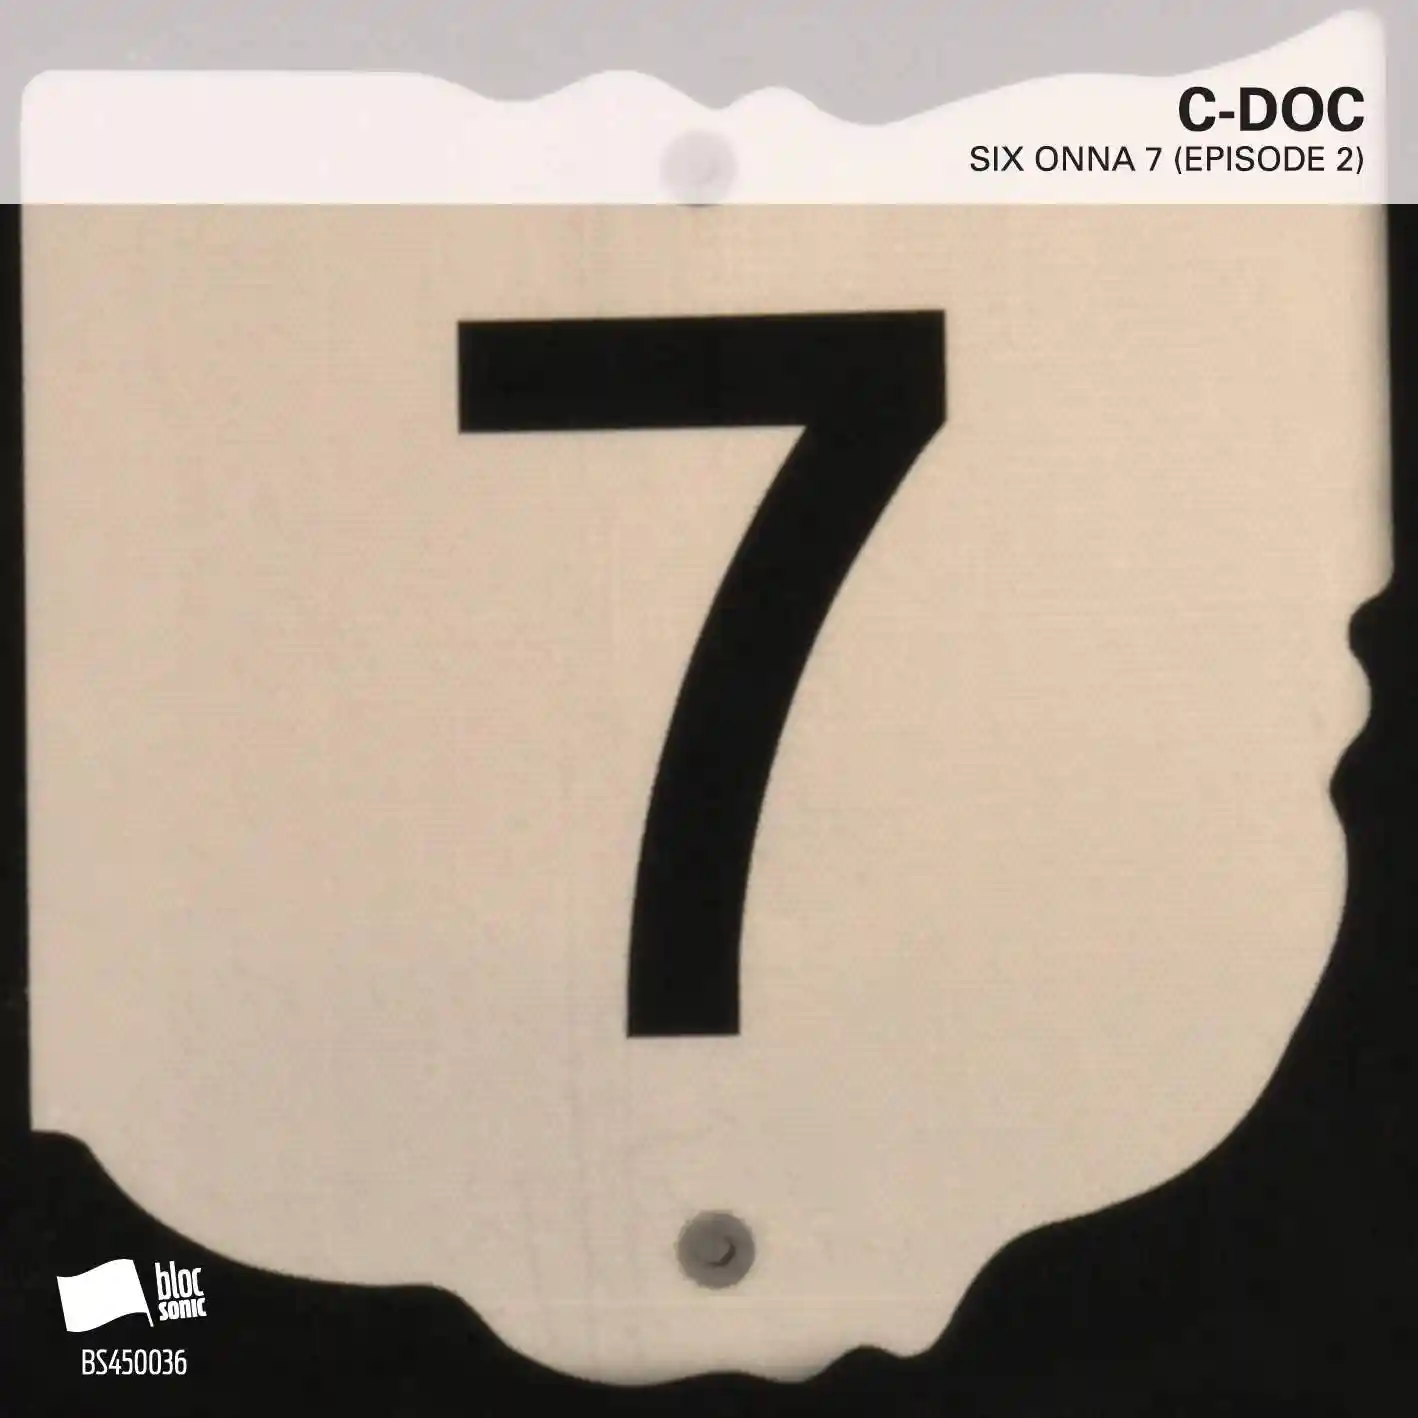 Album cover for “SIX ONNA 7 (Episode 2)” by C-Doc